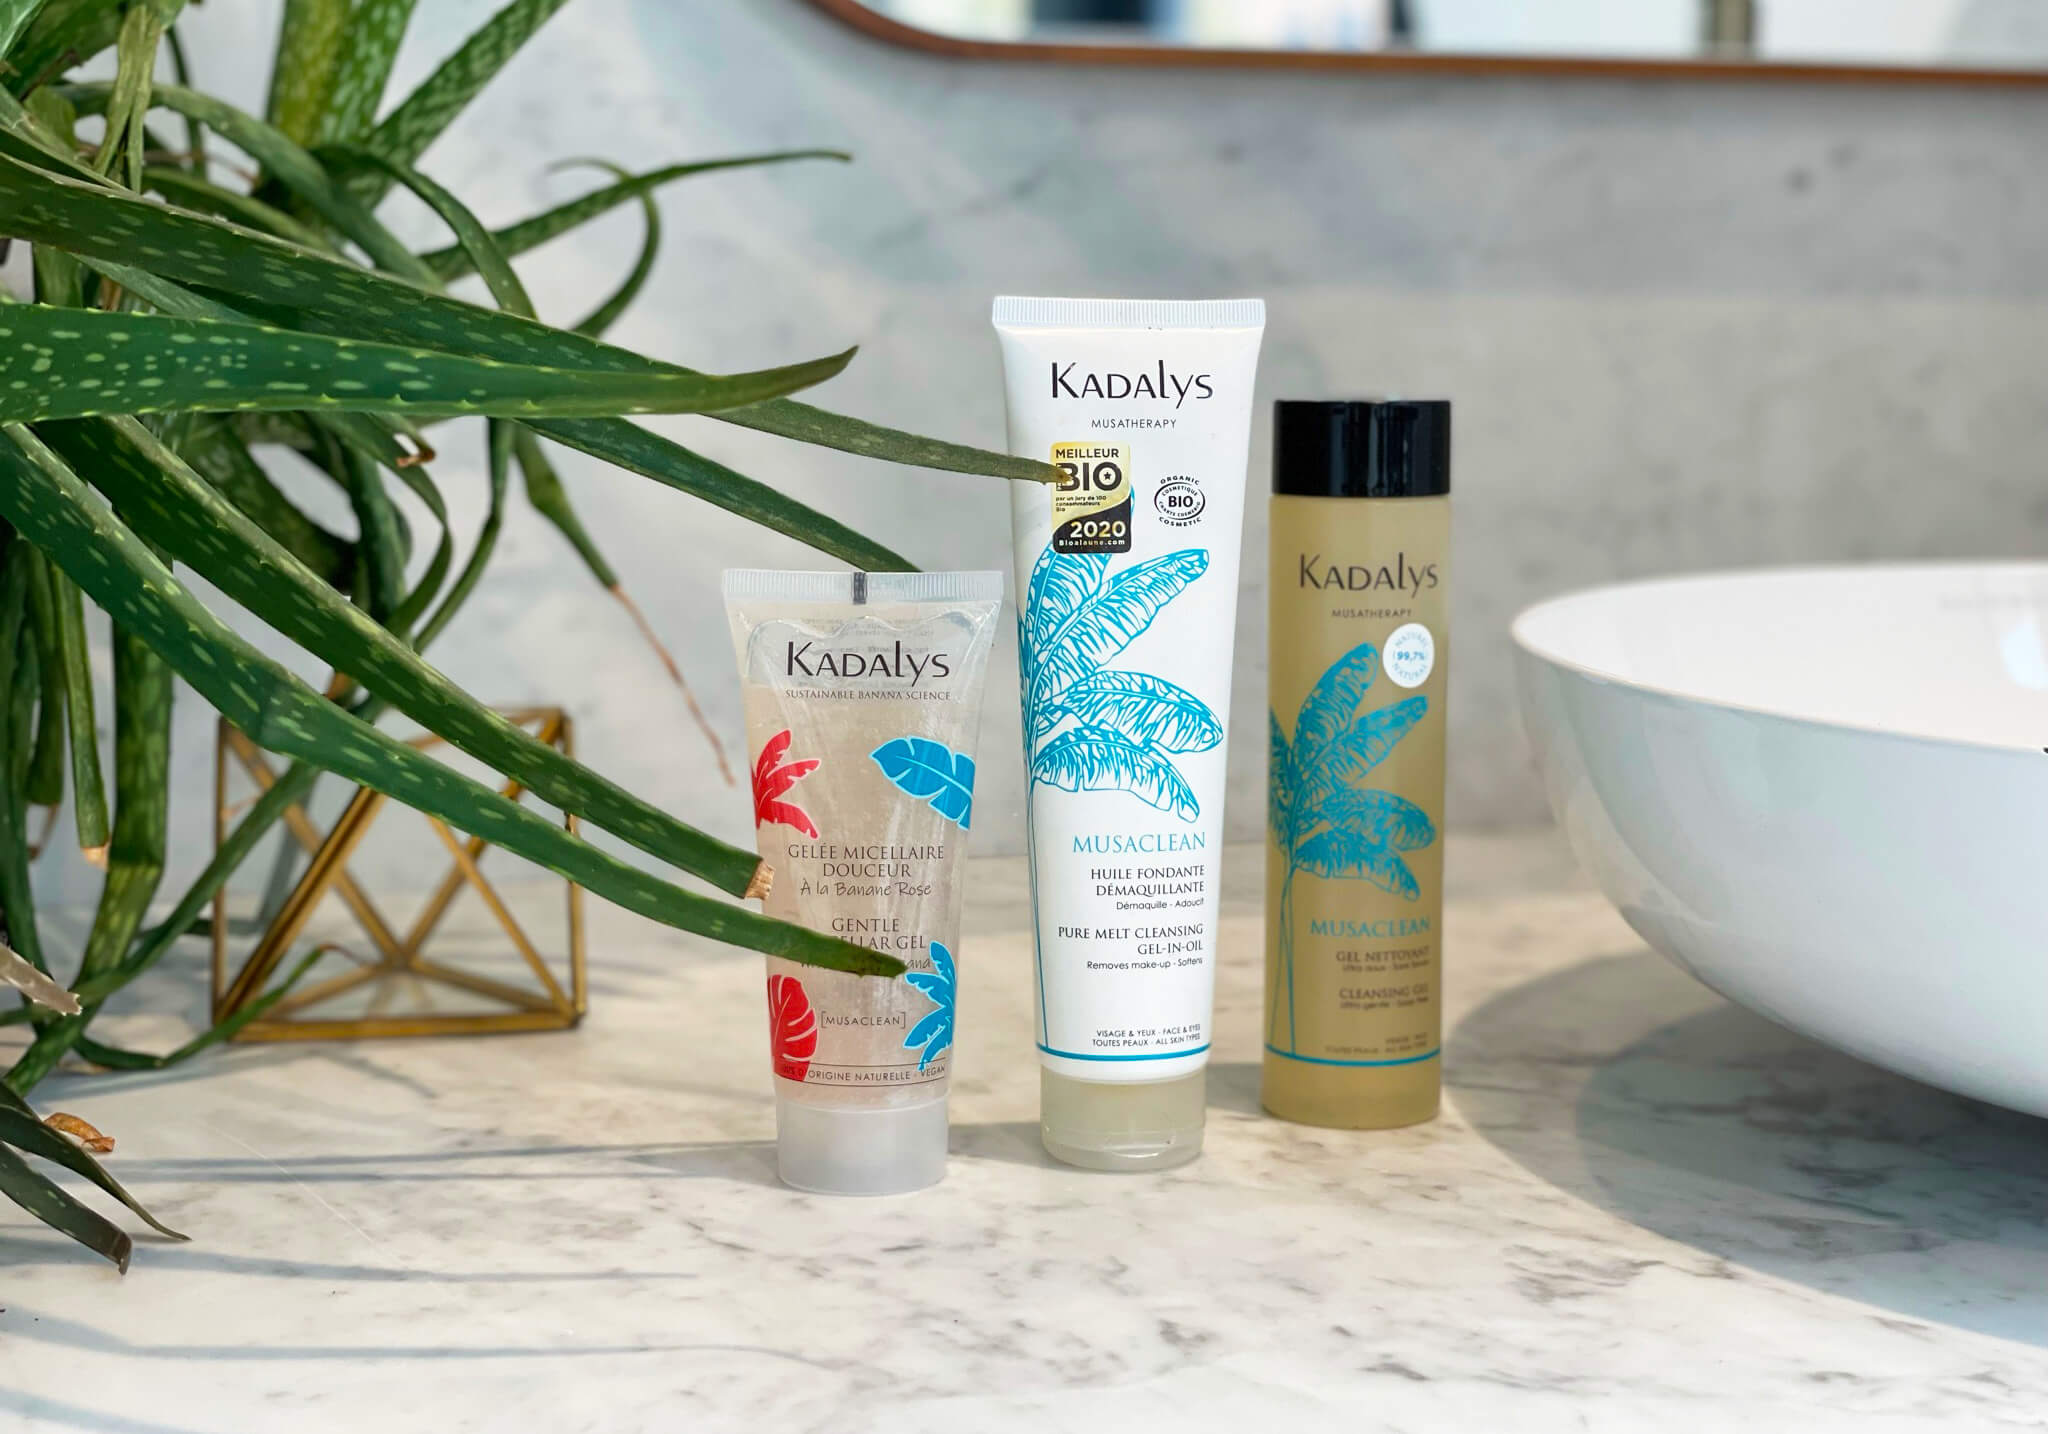 Image of Kadalys makeup removers and cleansers on a bathroom counter